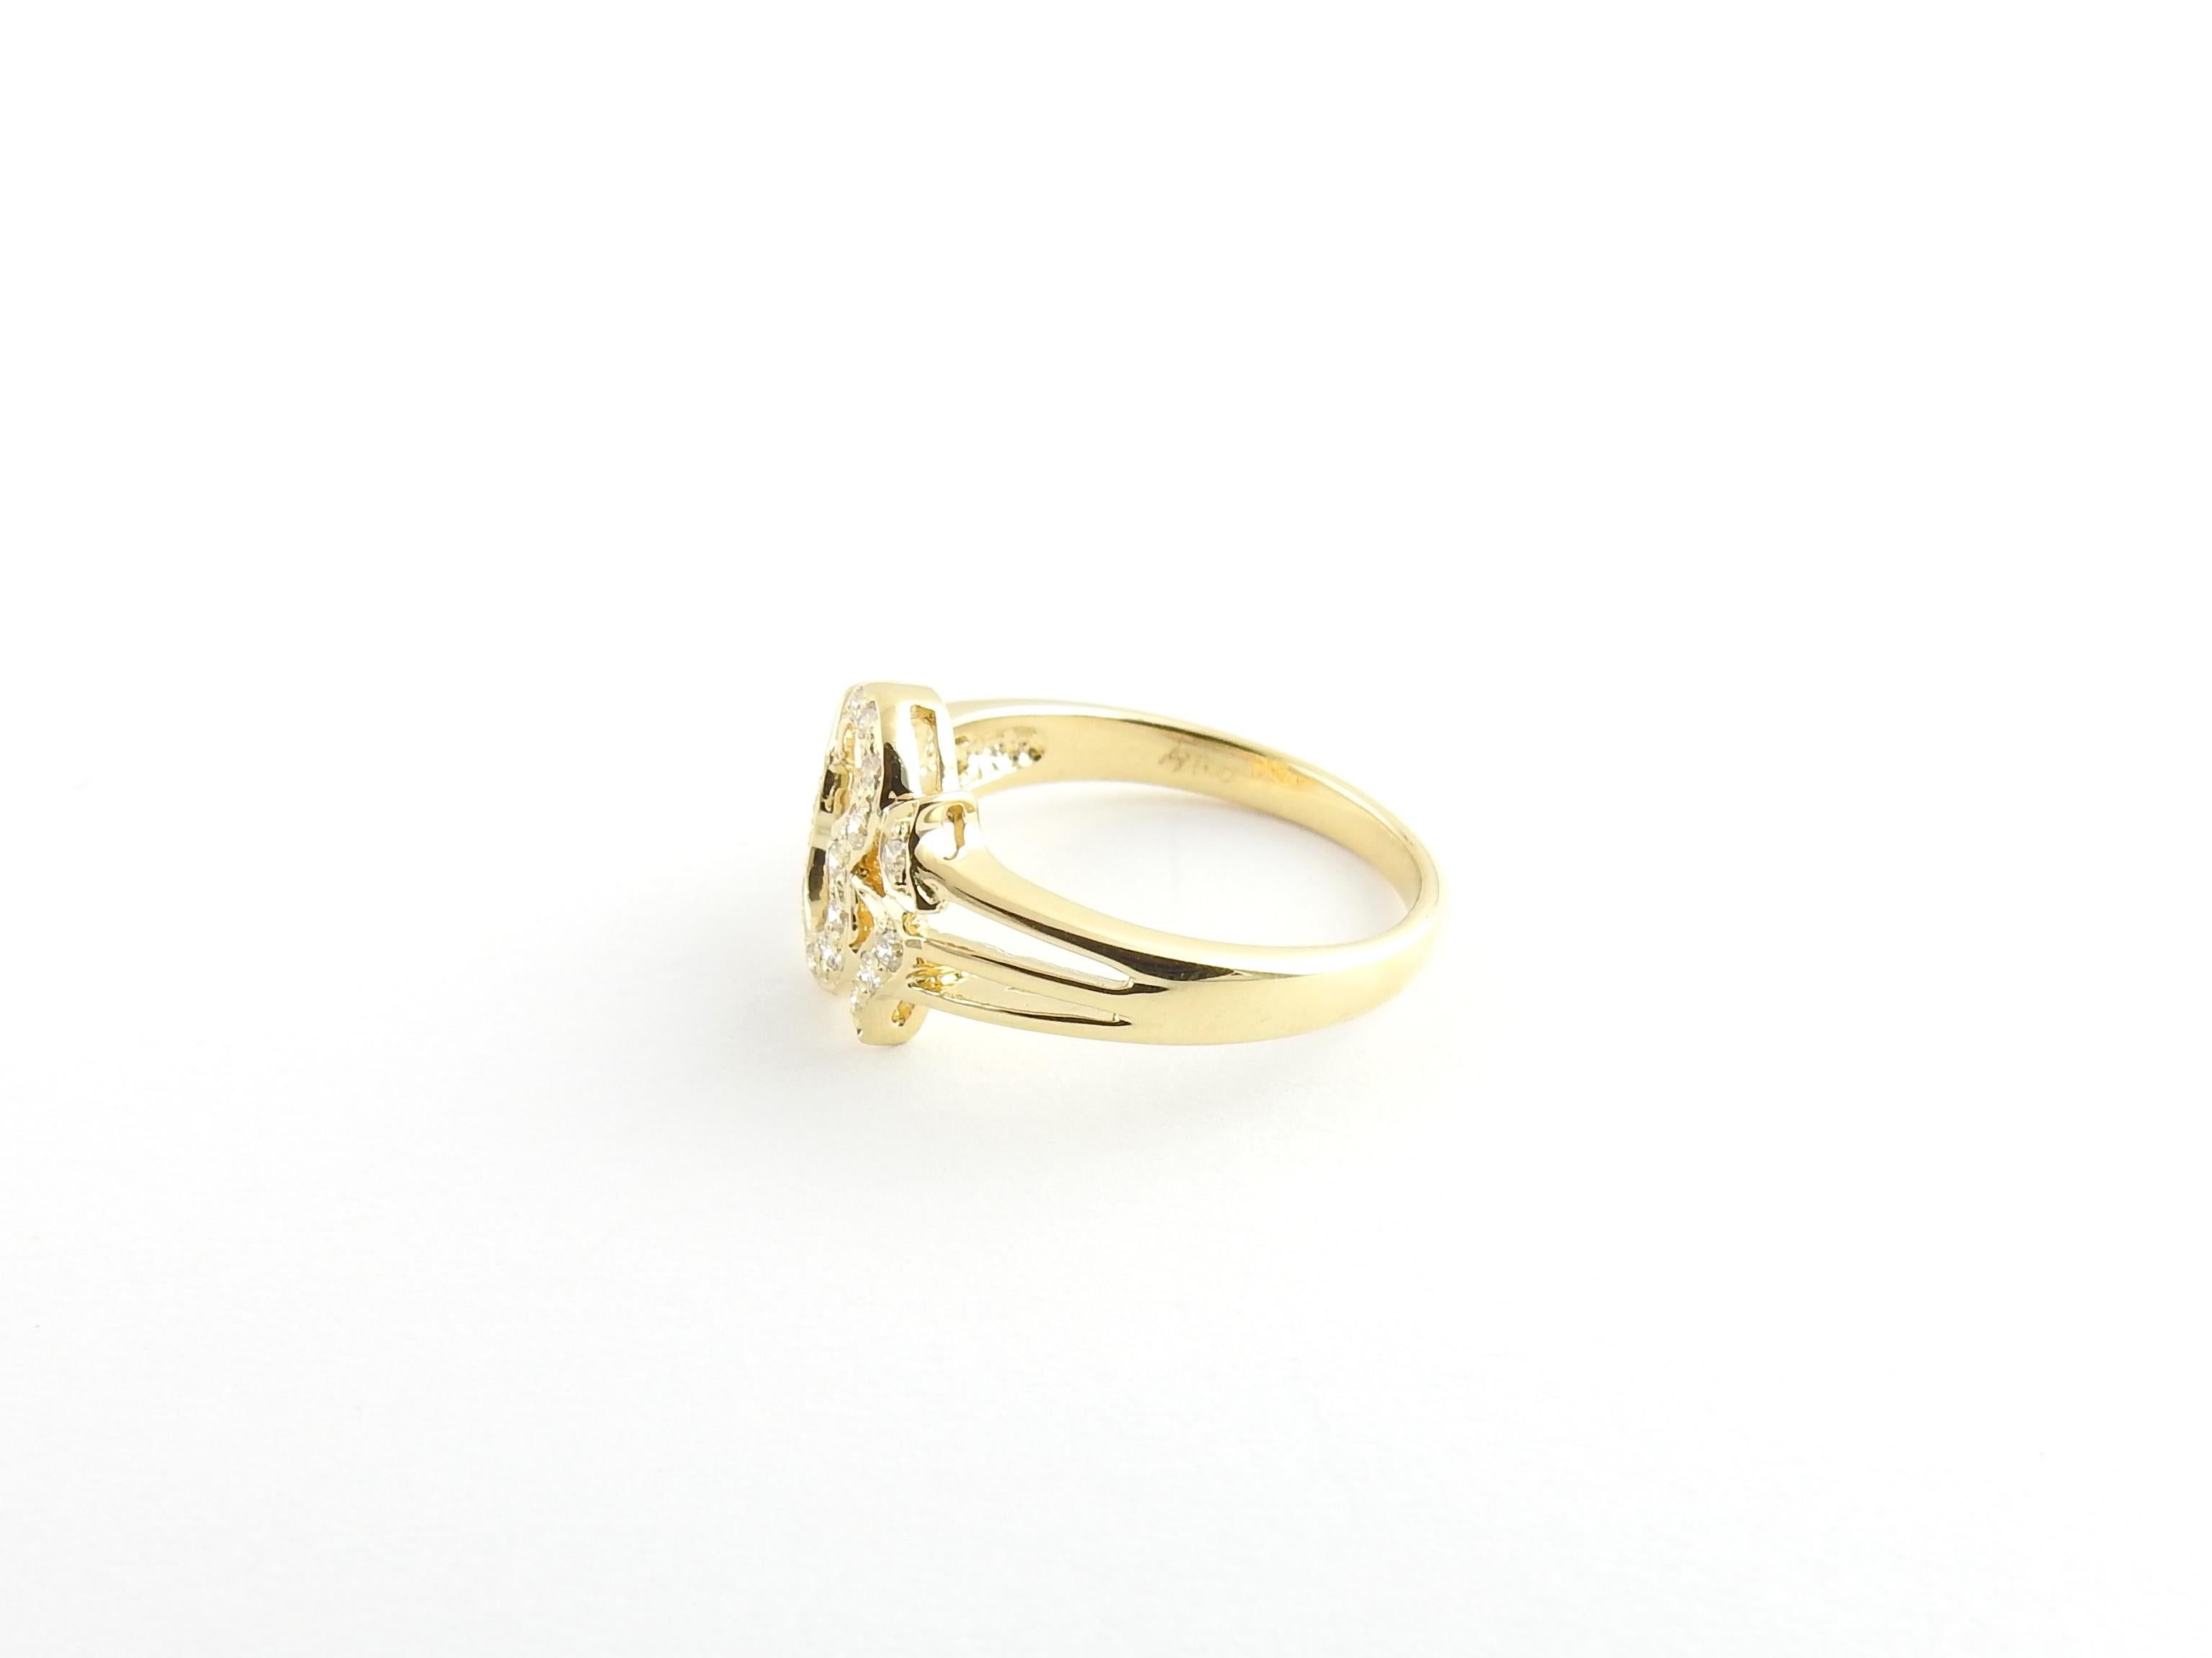 Vintage 18 Karat Yellow Gold and Diamond Ohm Symbol Ring Size 6

This lovely ring features the the spirtual Hindu 